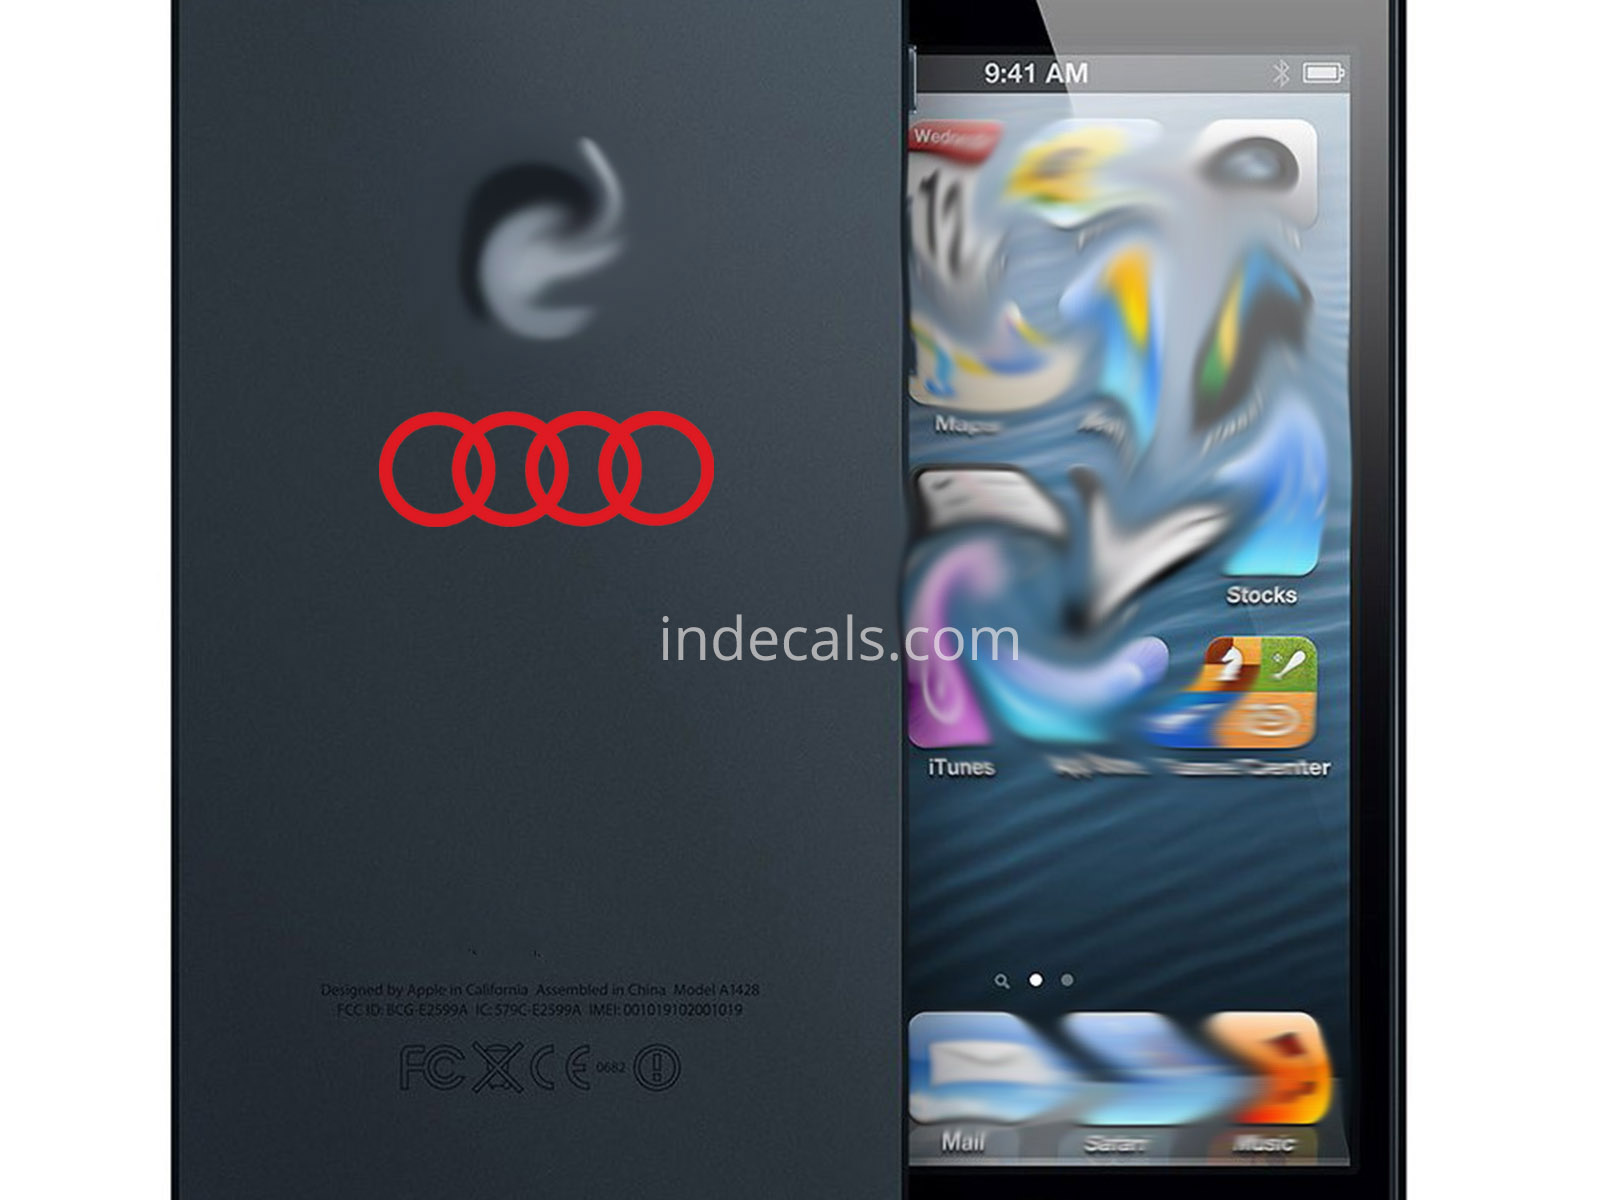 3 x Audi Rings Stickers for Smartphone - Red